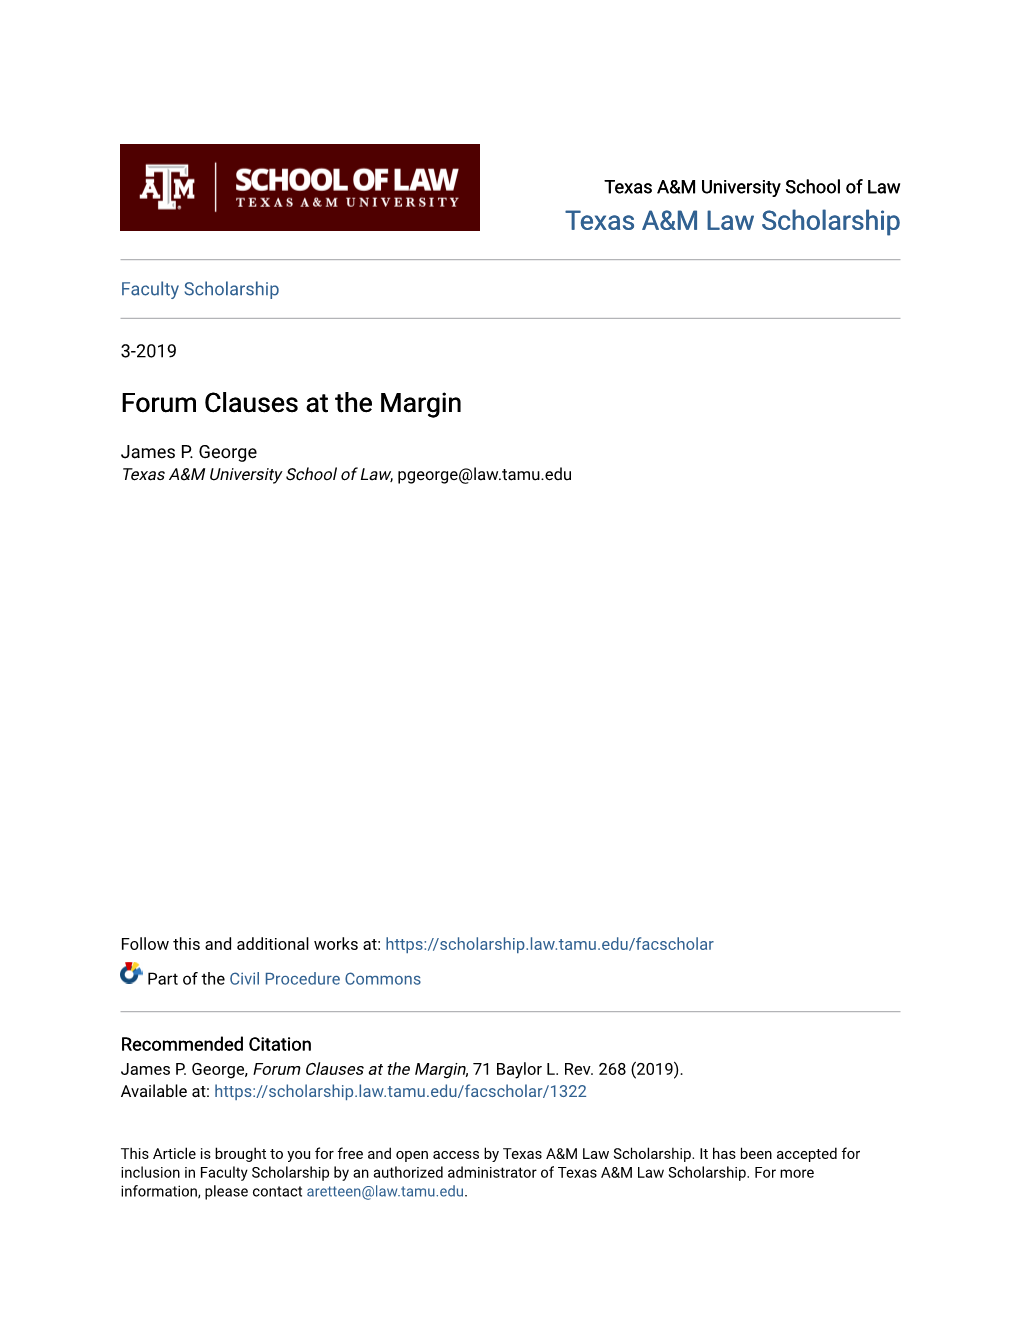 Forum Clauses at the Margin